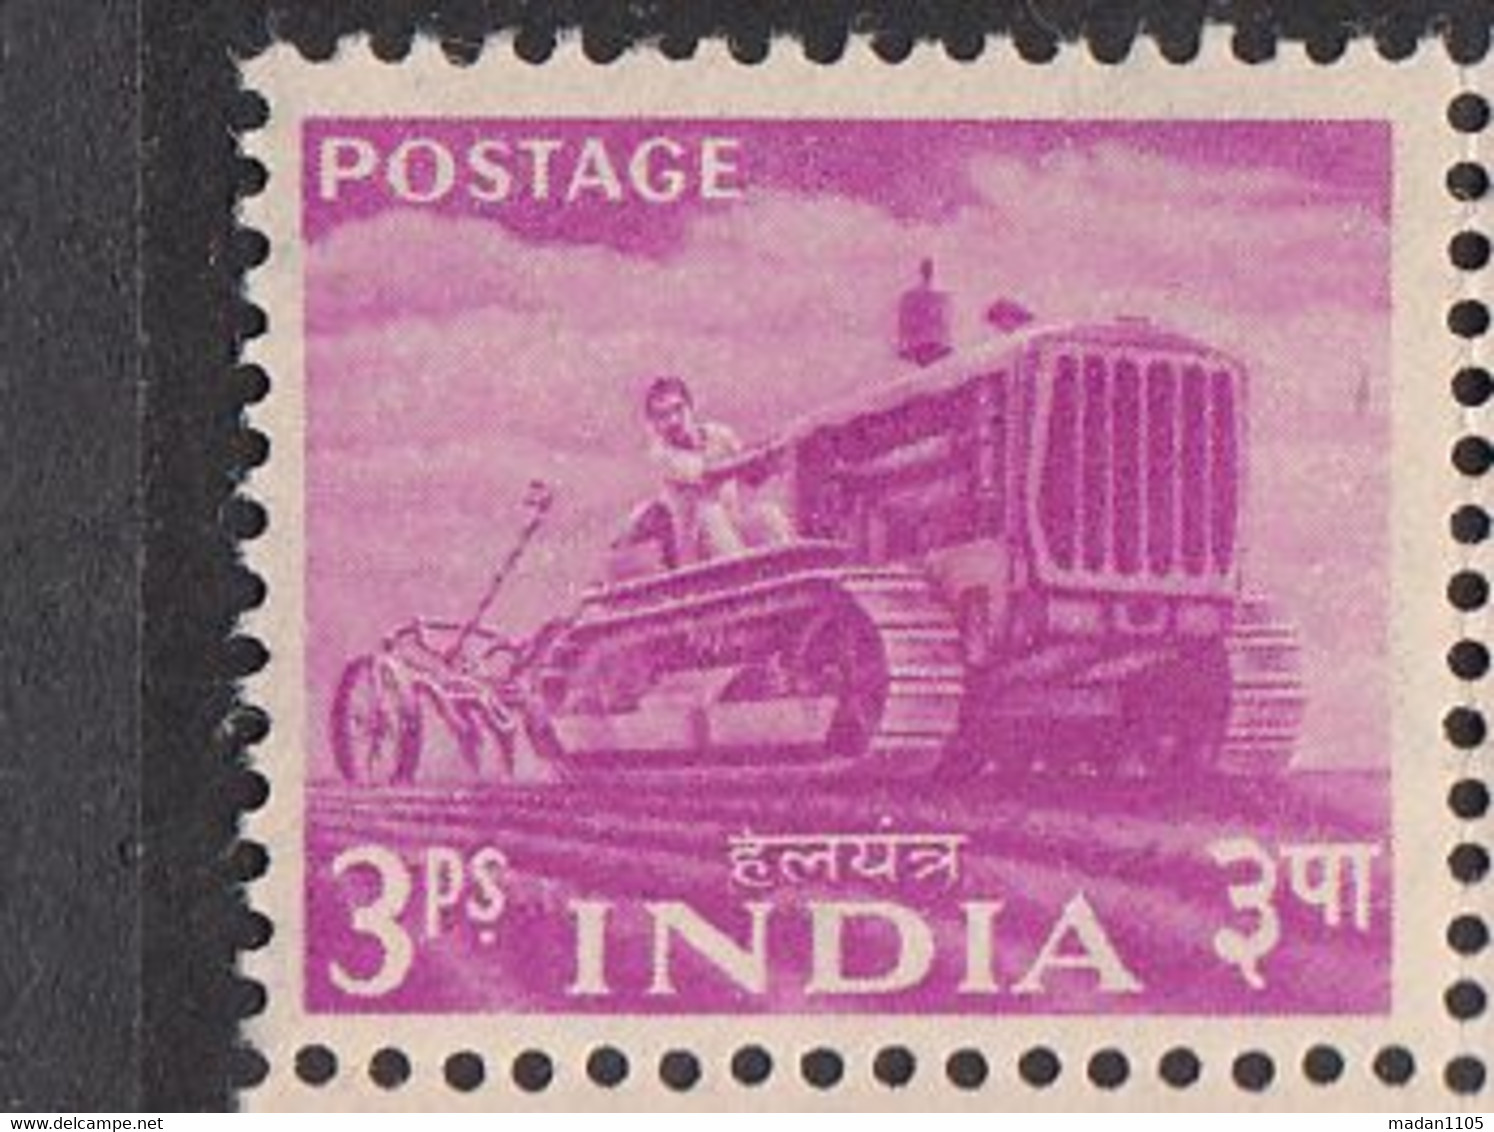 INDIA 1955  Five Year Plan (2nd Definitive Serie) 3 Ps Tractor, Agriculture  MNH (**) (Never Hinged) - Nuevos